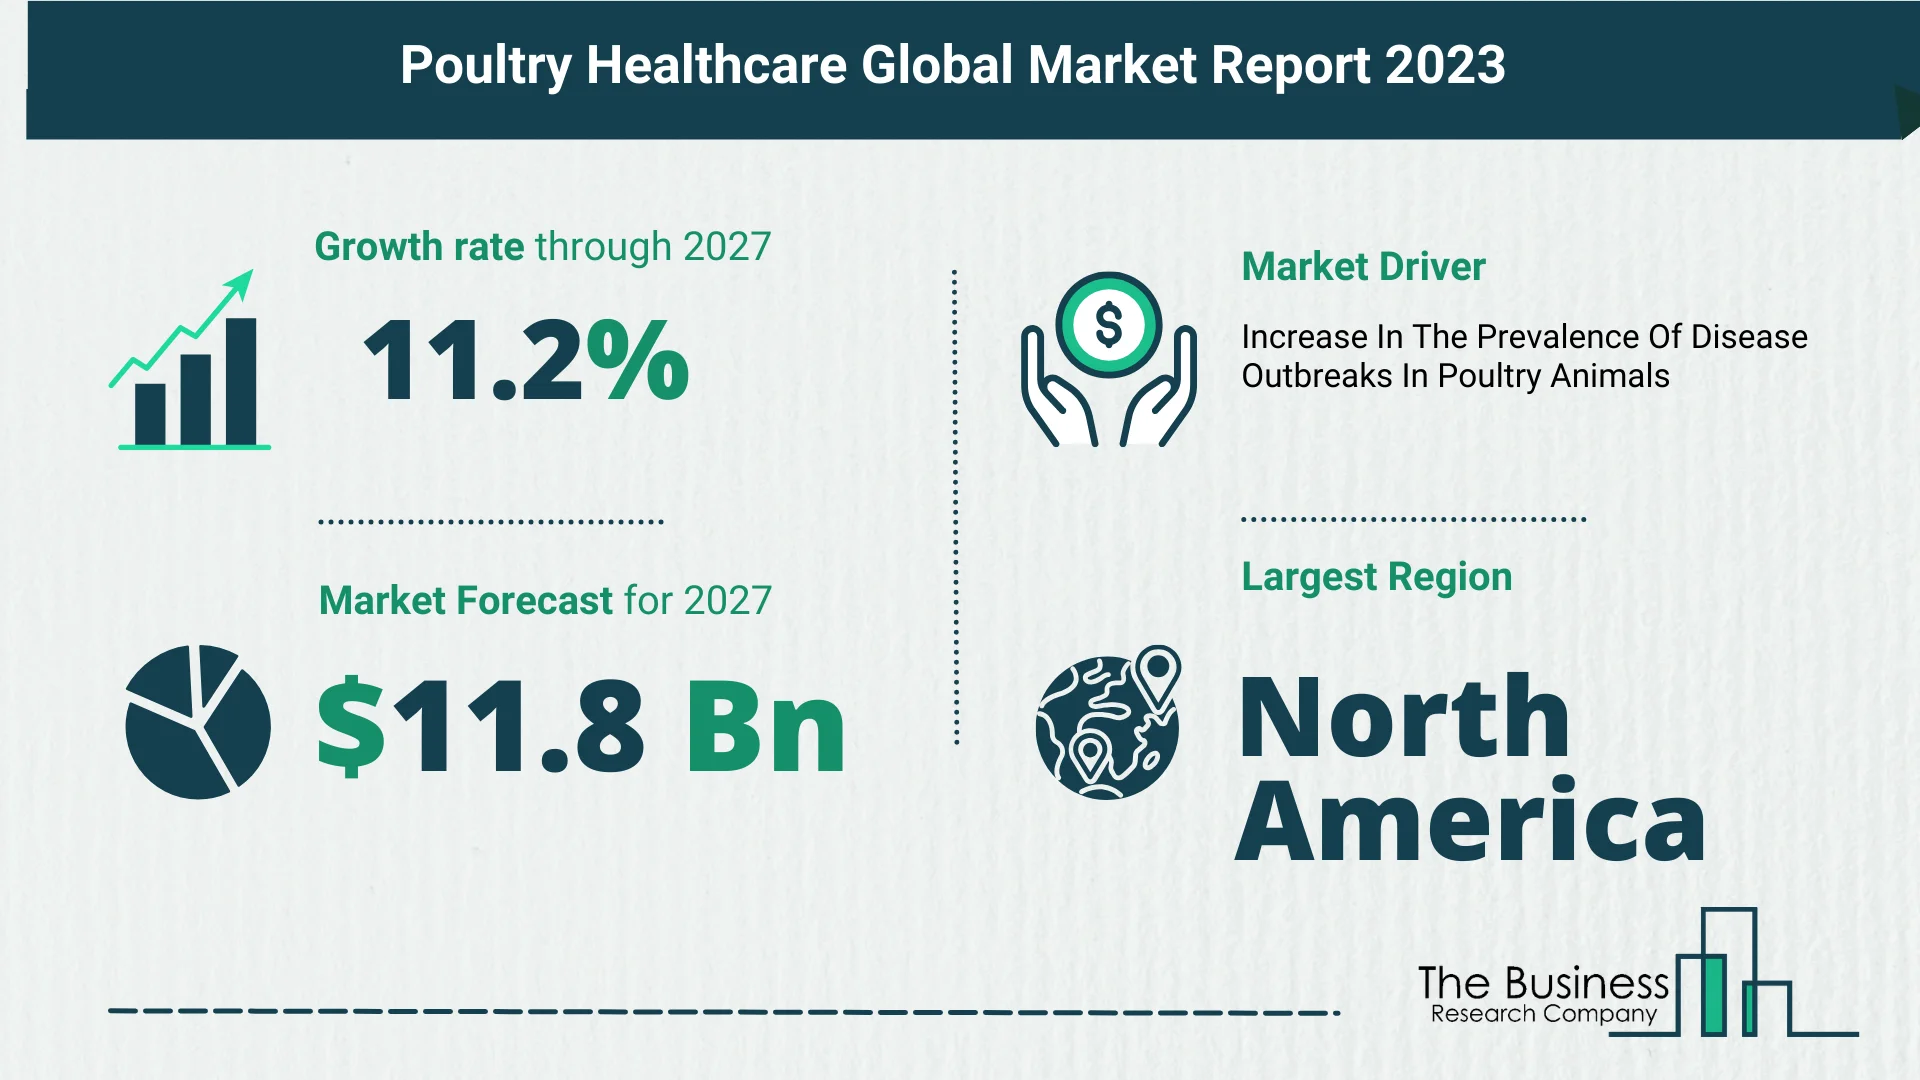 Global Poultry Healthcare Market